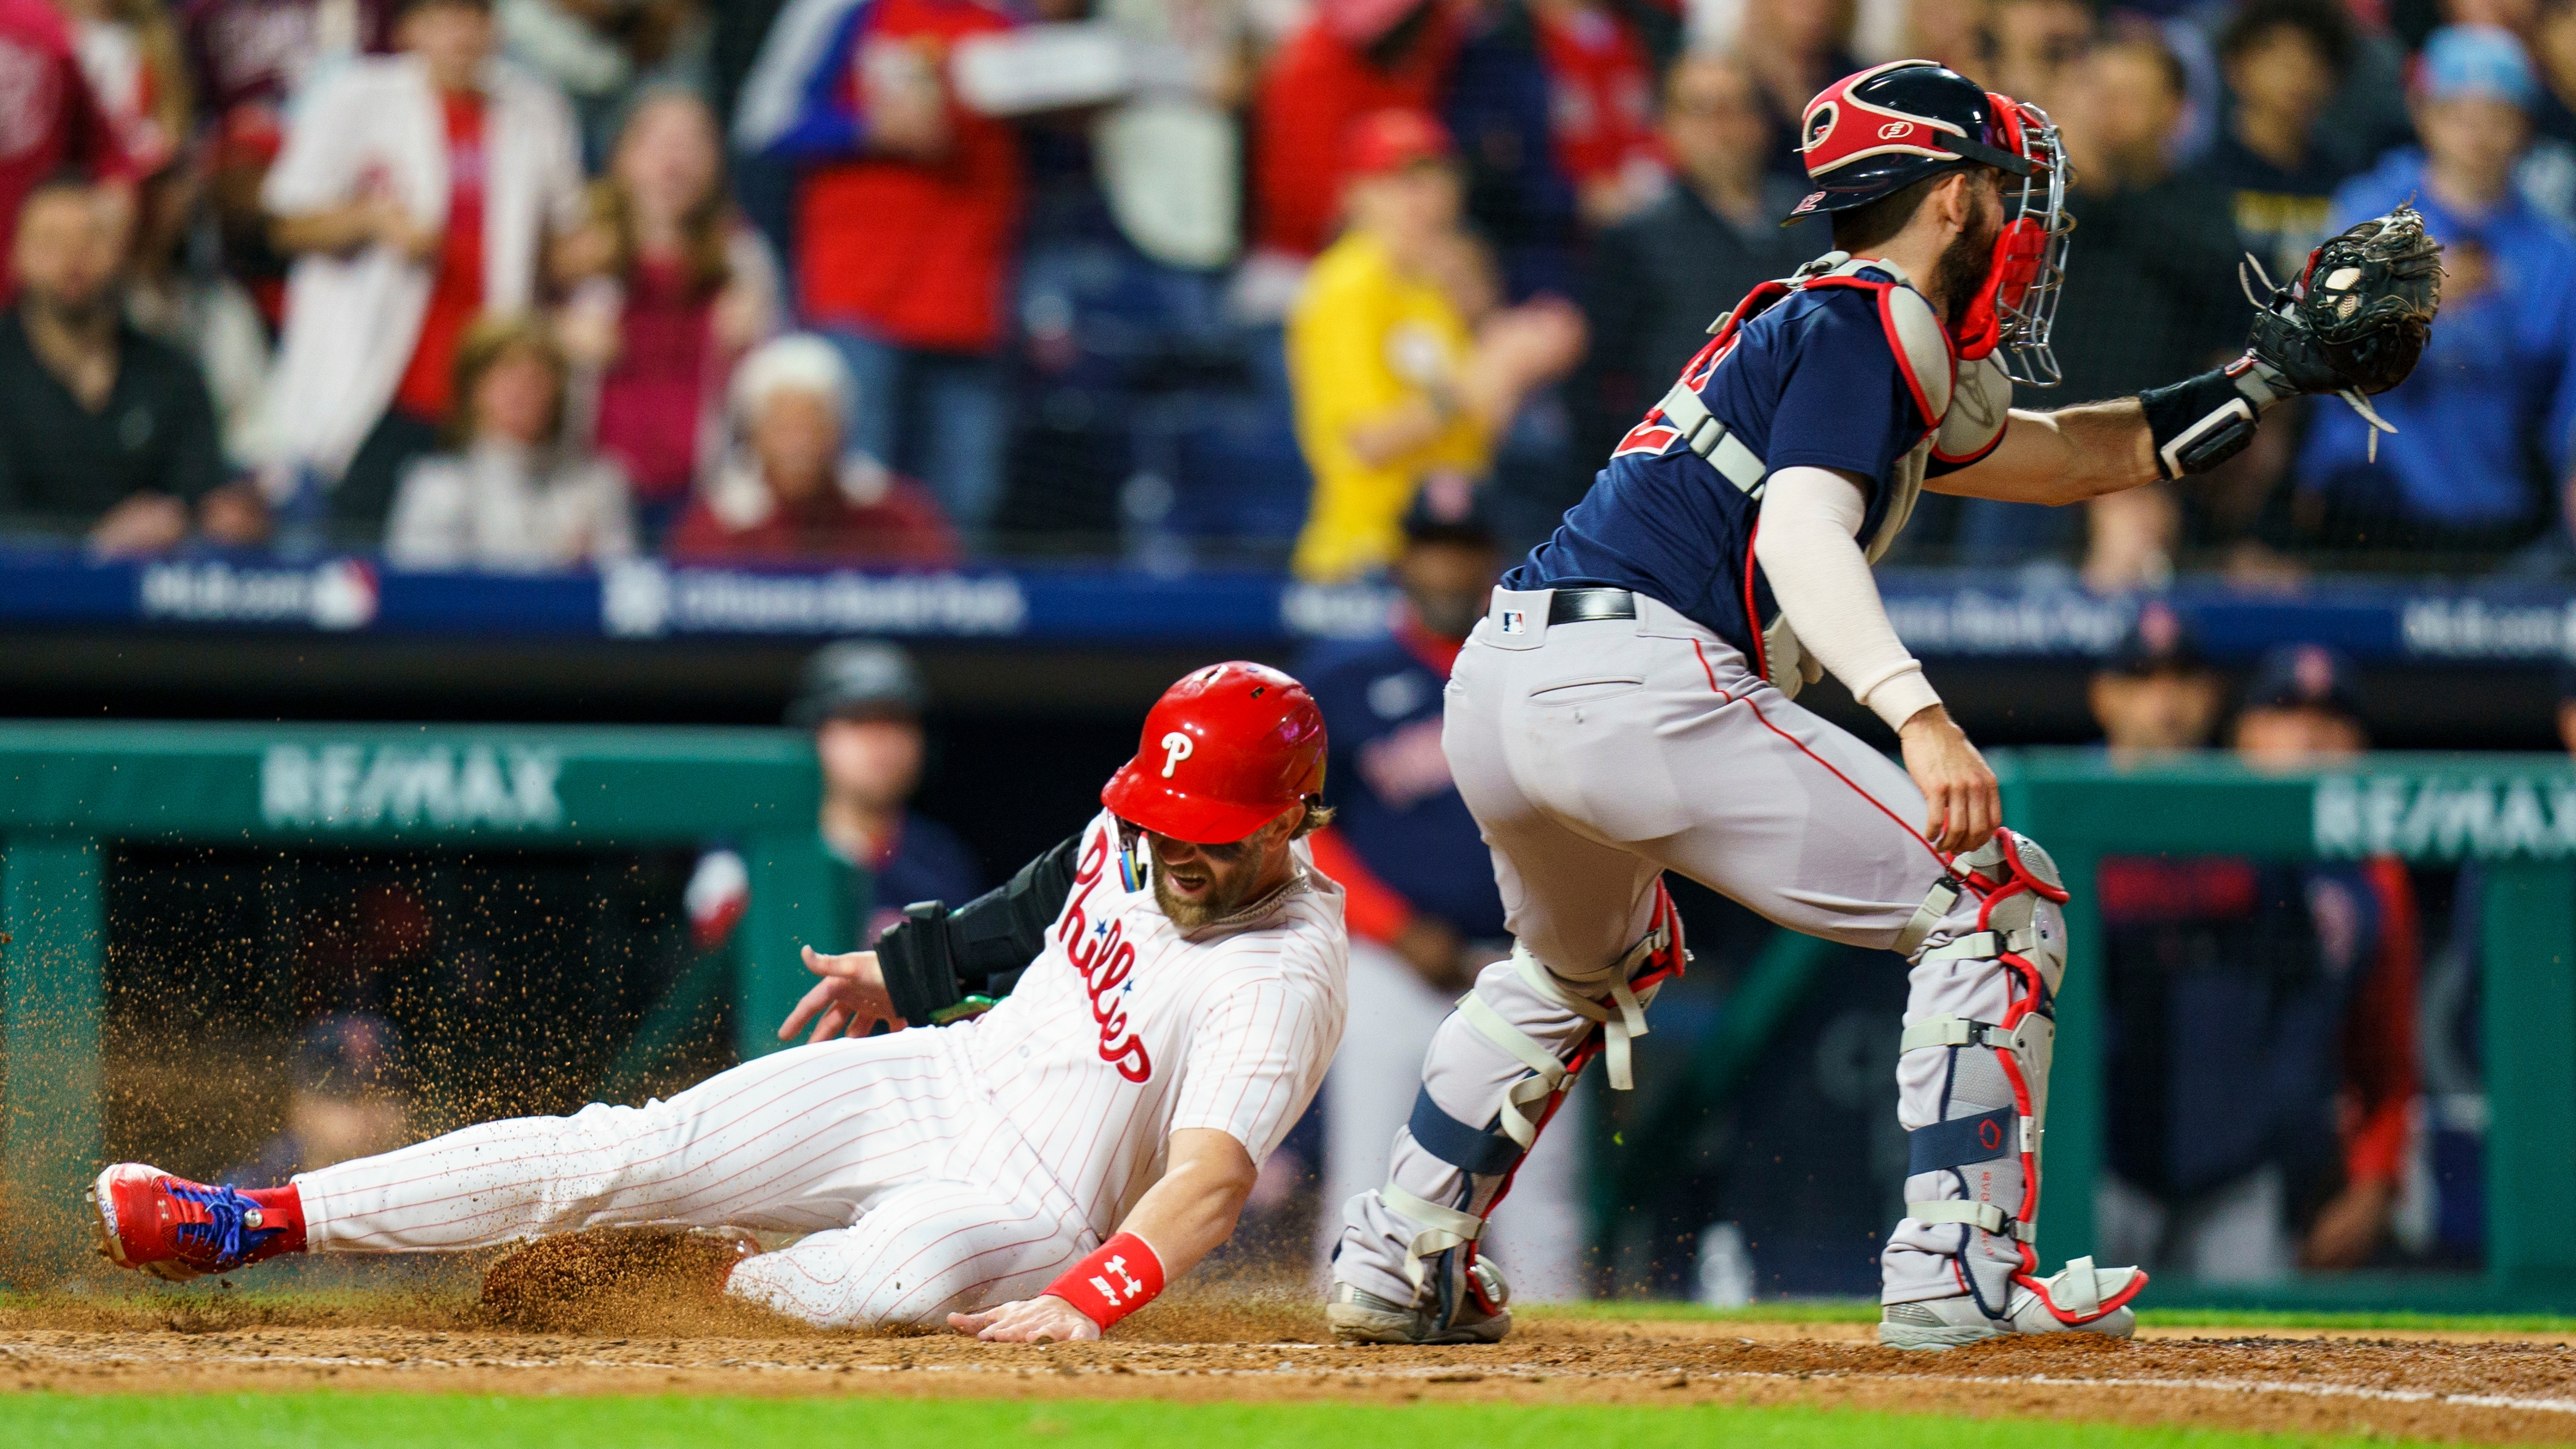 Bryce Harper injury update: Phillies star leaves game vs. Mets after being  hit by pitch - DraftKings Network